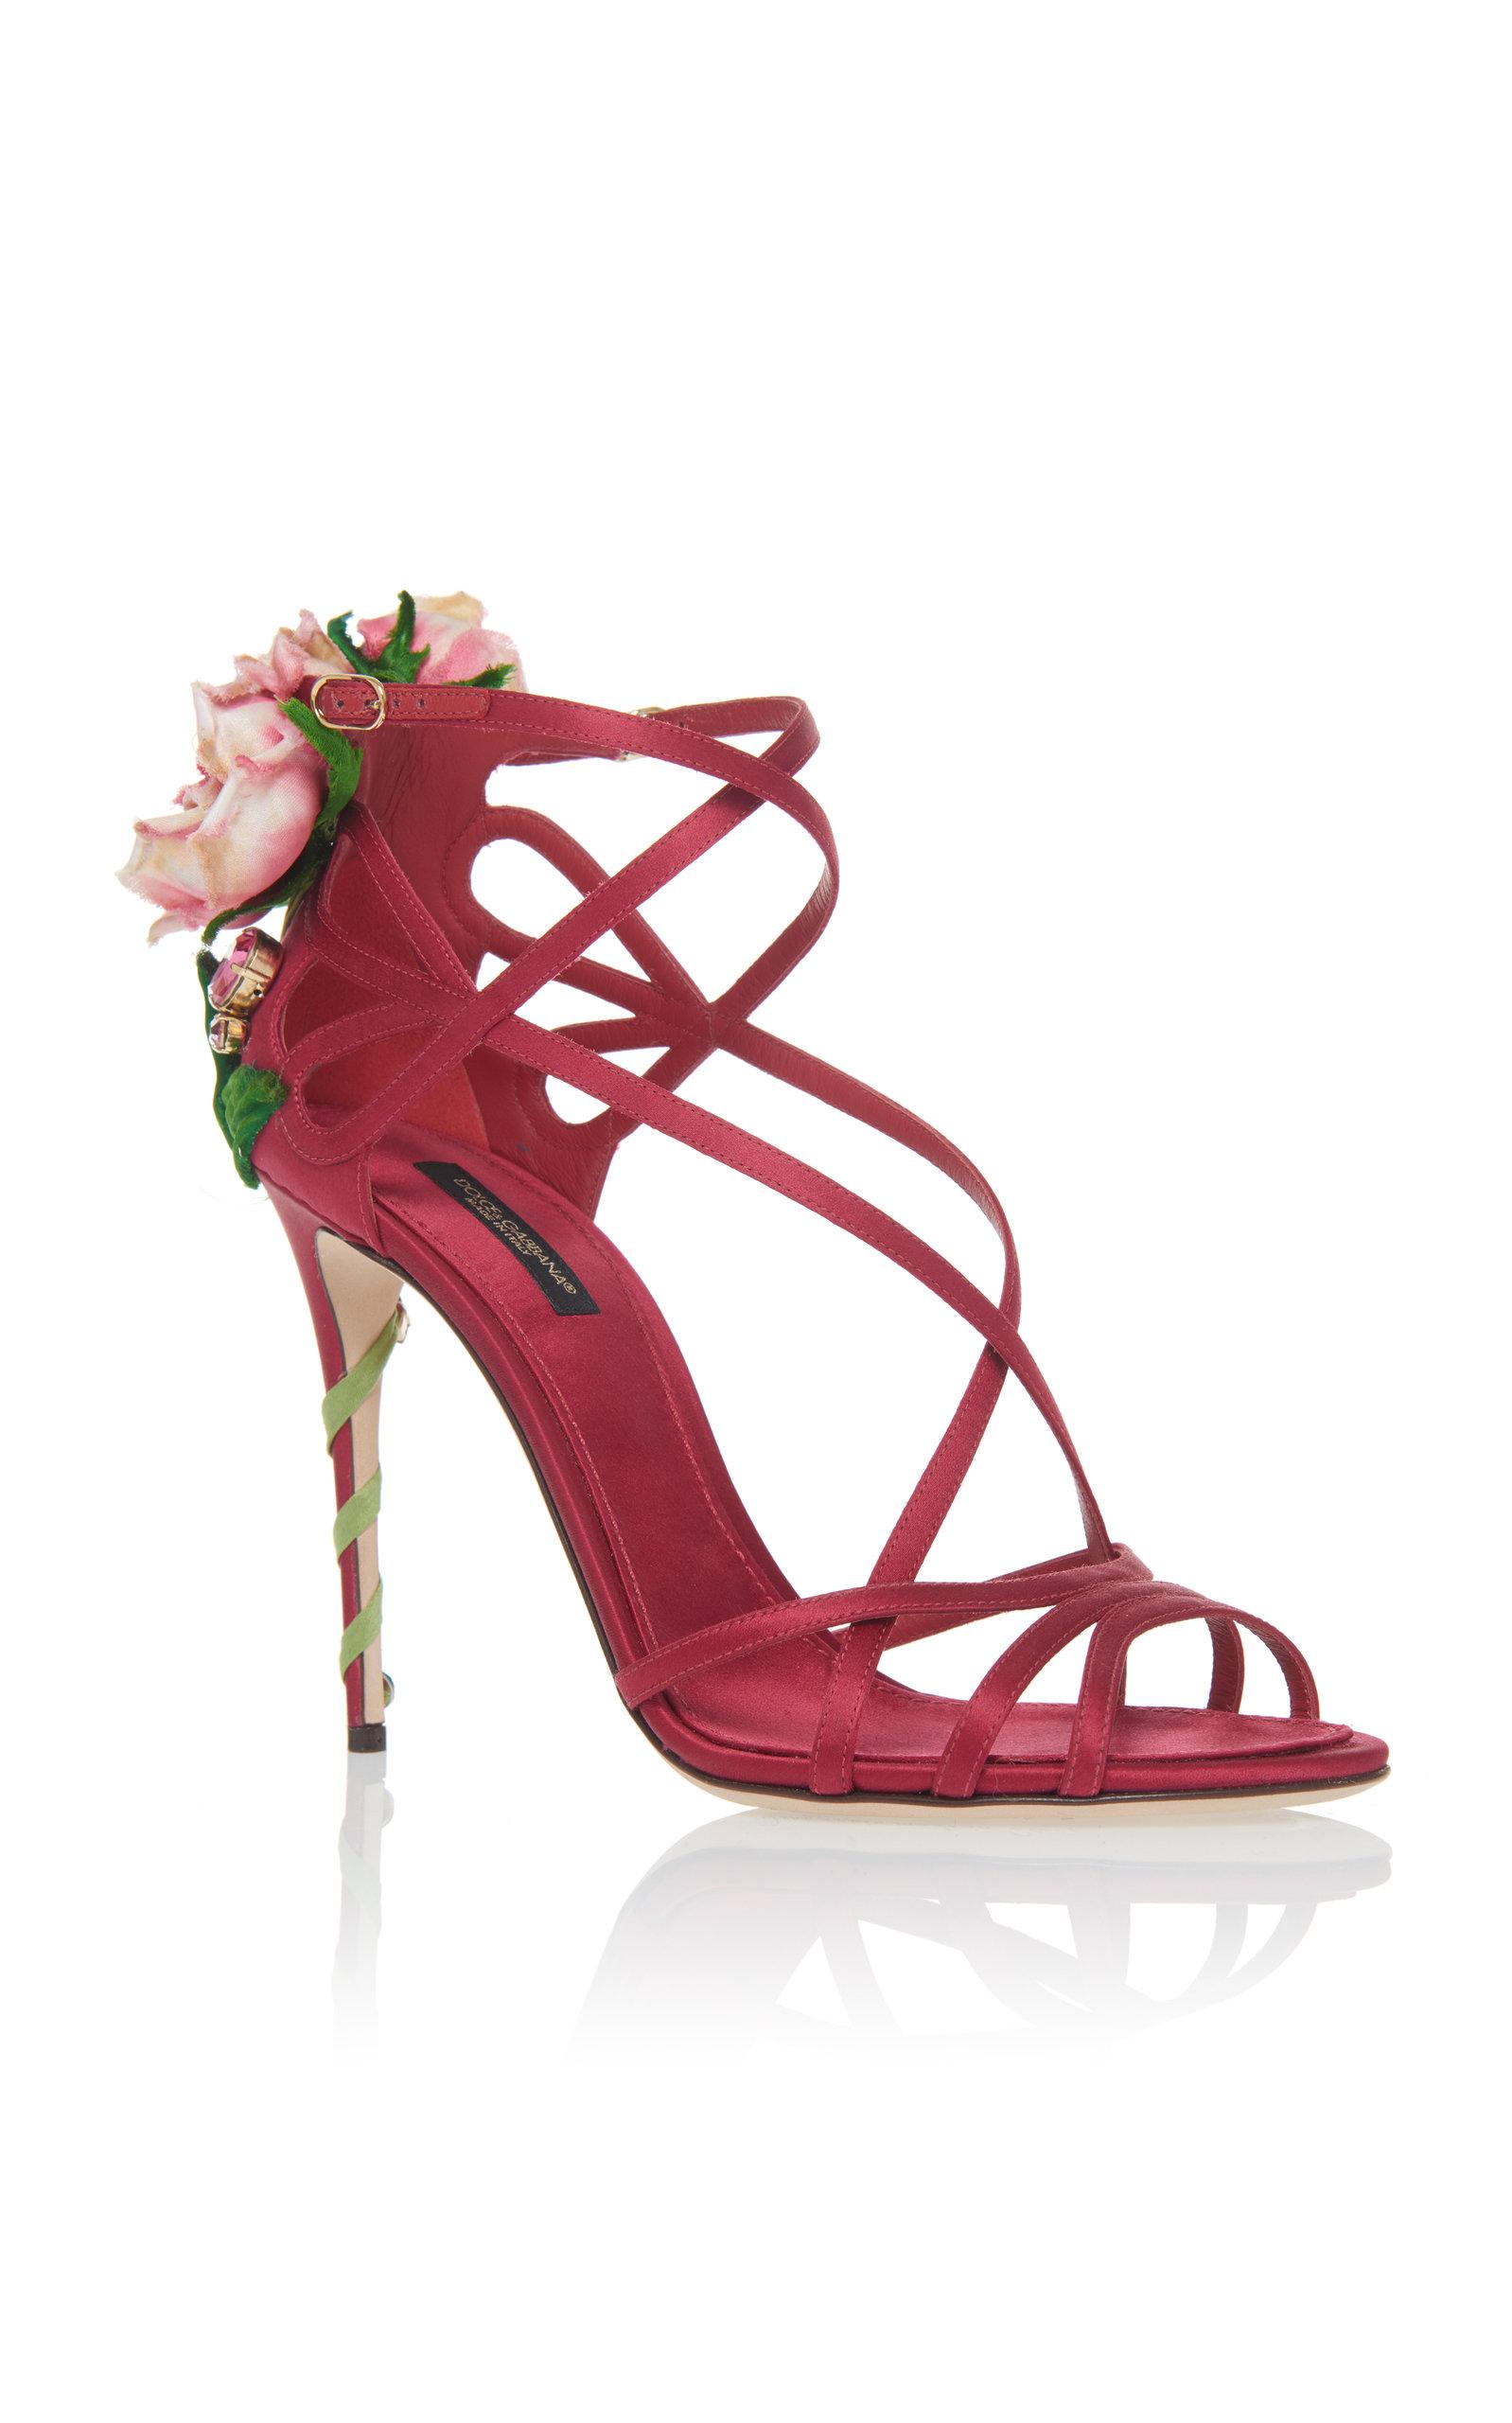 Dolce & Gabbana Satin Keira Rose Jewelled Sandals in Red - Lyst